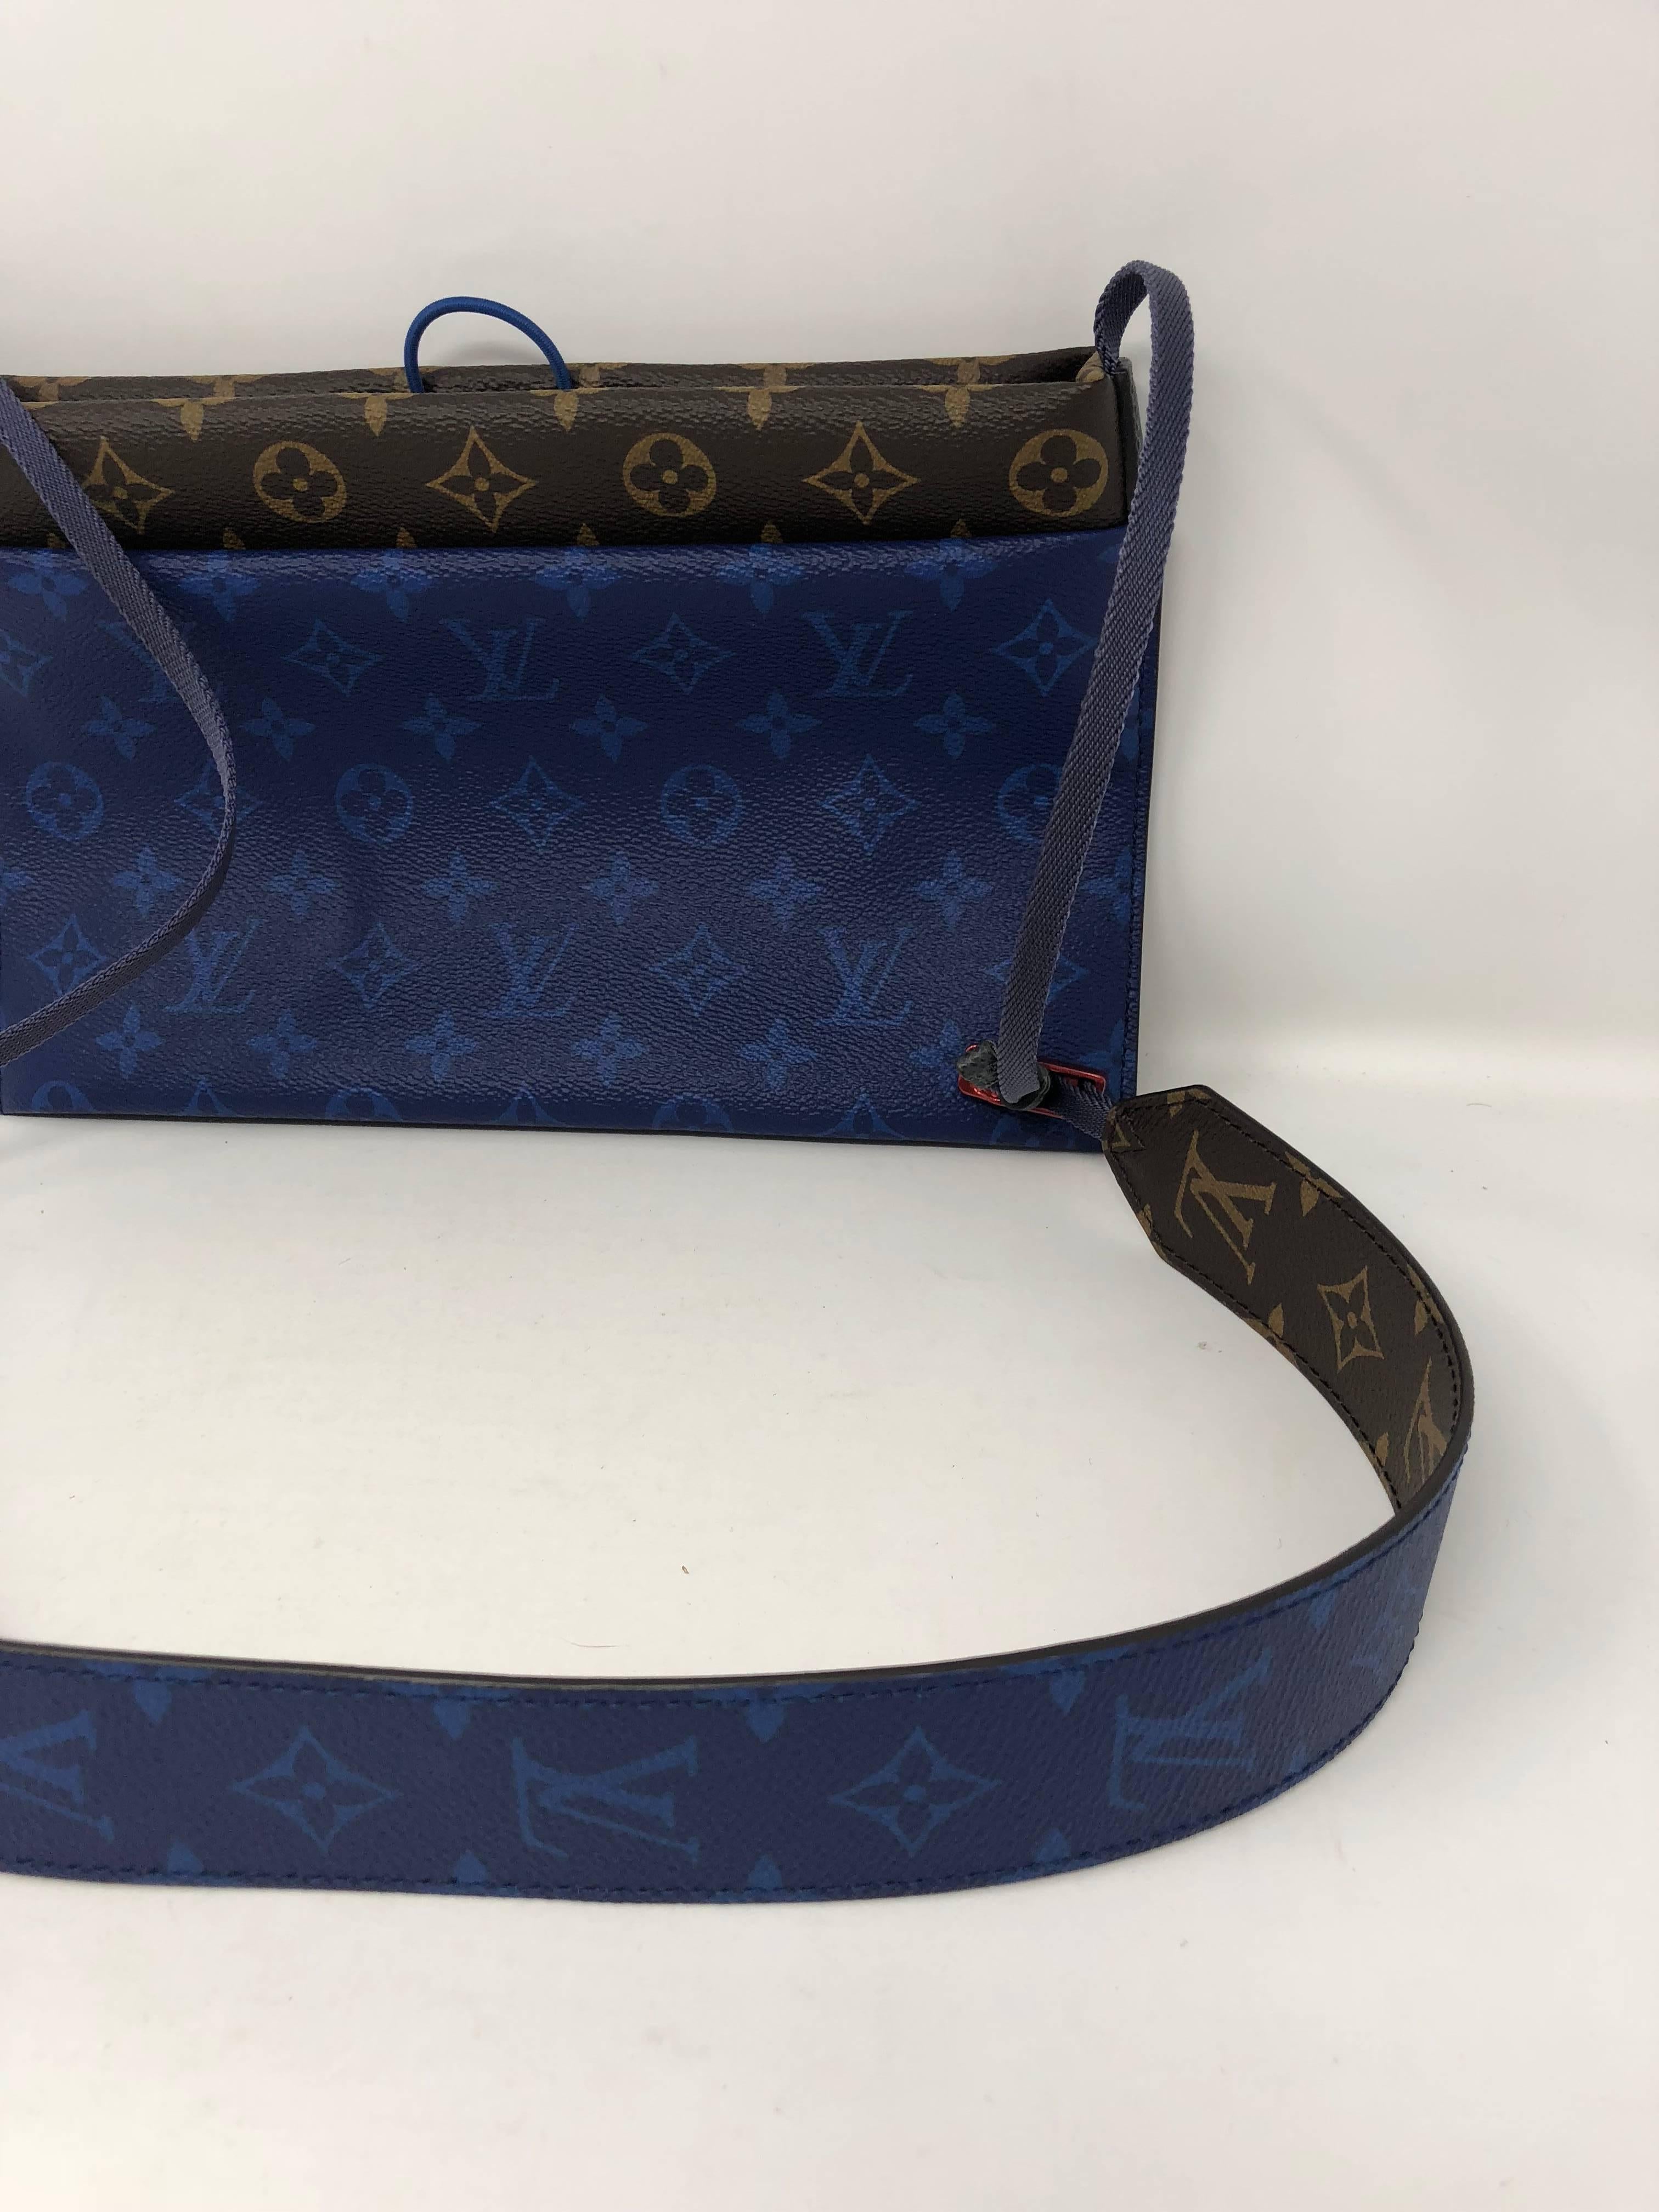 Louis Vuitton Pacific Monogram Small Outdoor Pouch is a travel or everyday crossbody.  The signature monogram canvas is mixed with blue and creates a sporty style from this 2018 outdoor collection. The pouch is versatile with any lifestyle. Sold out